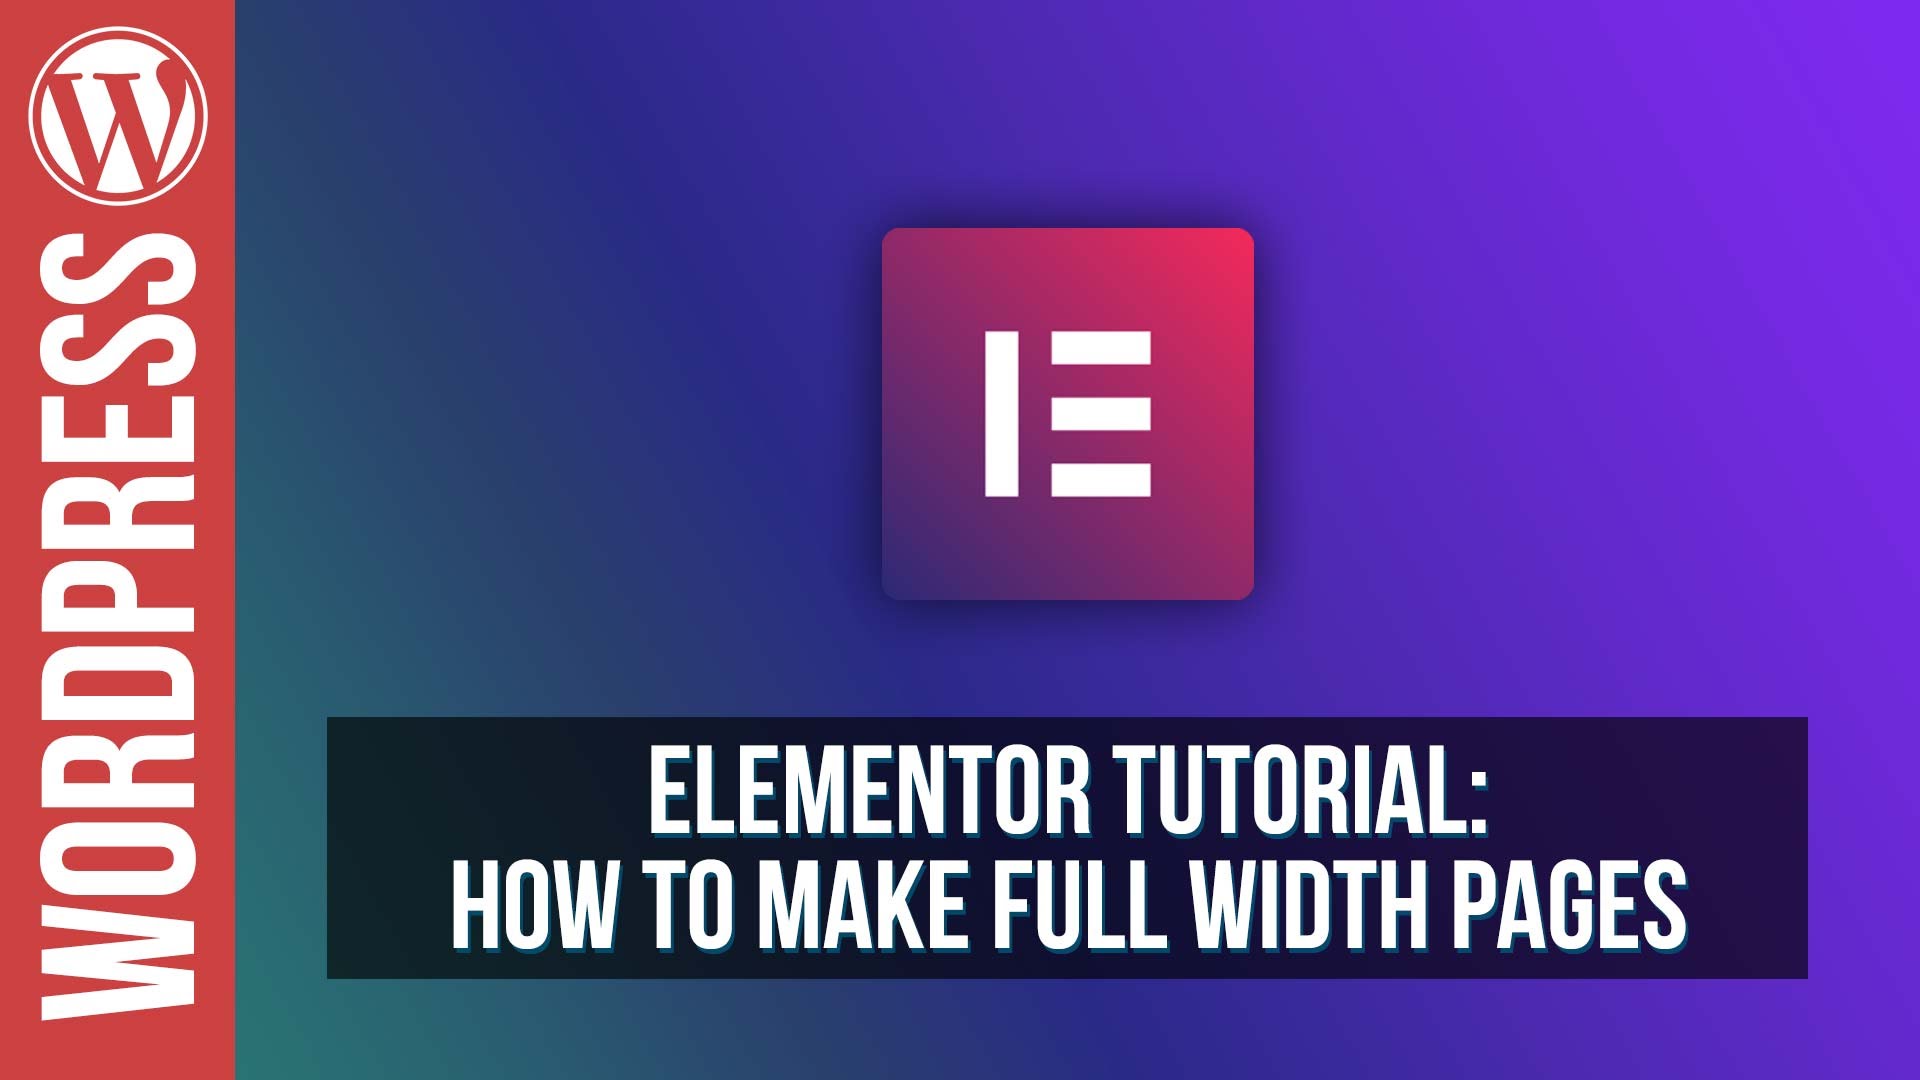 Elementor for WordPress – How to Make Full Width Pages / Layouts